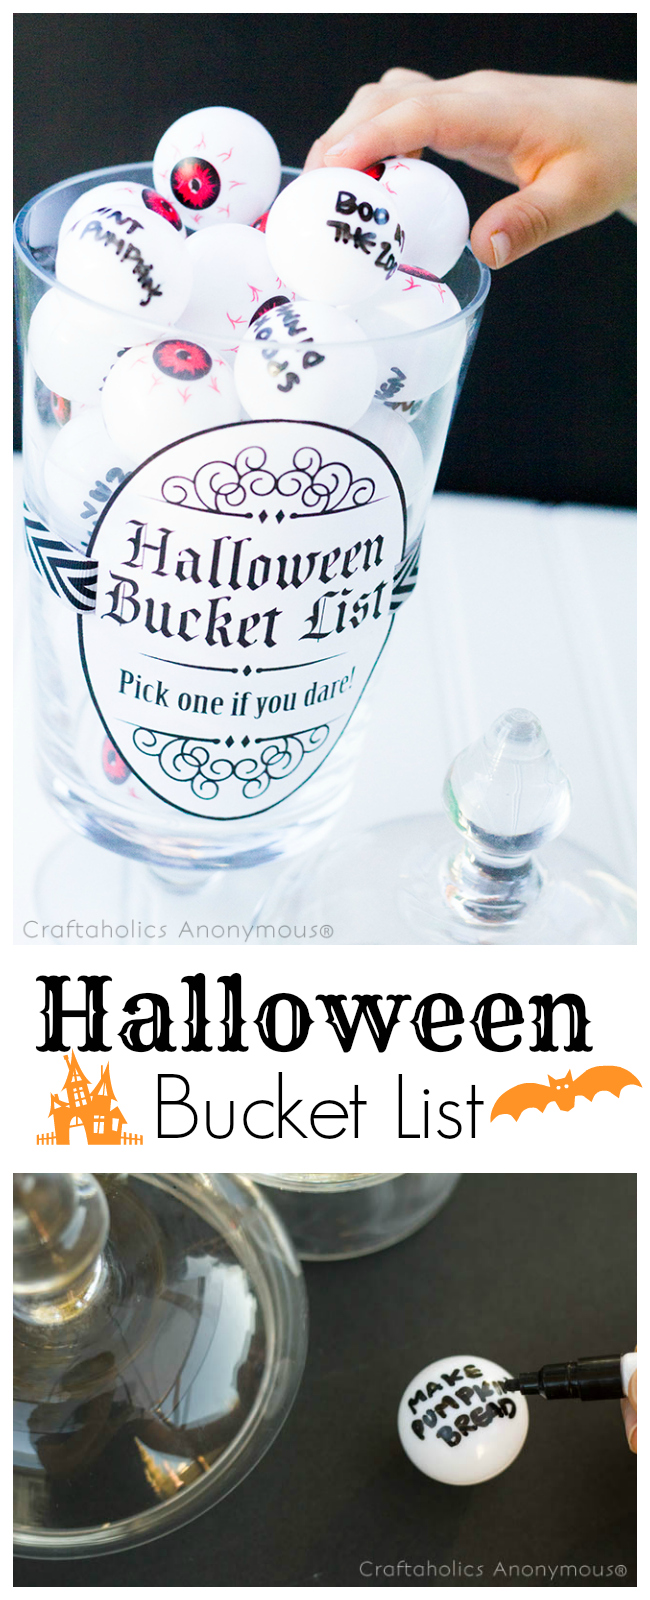 Love this idea! Halloween Bucket list for kids. Great for making fun fall memories!